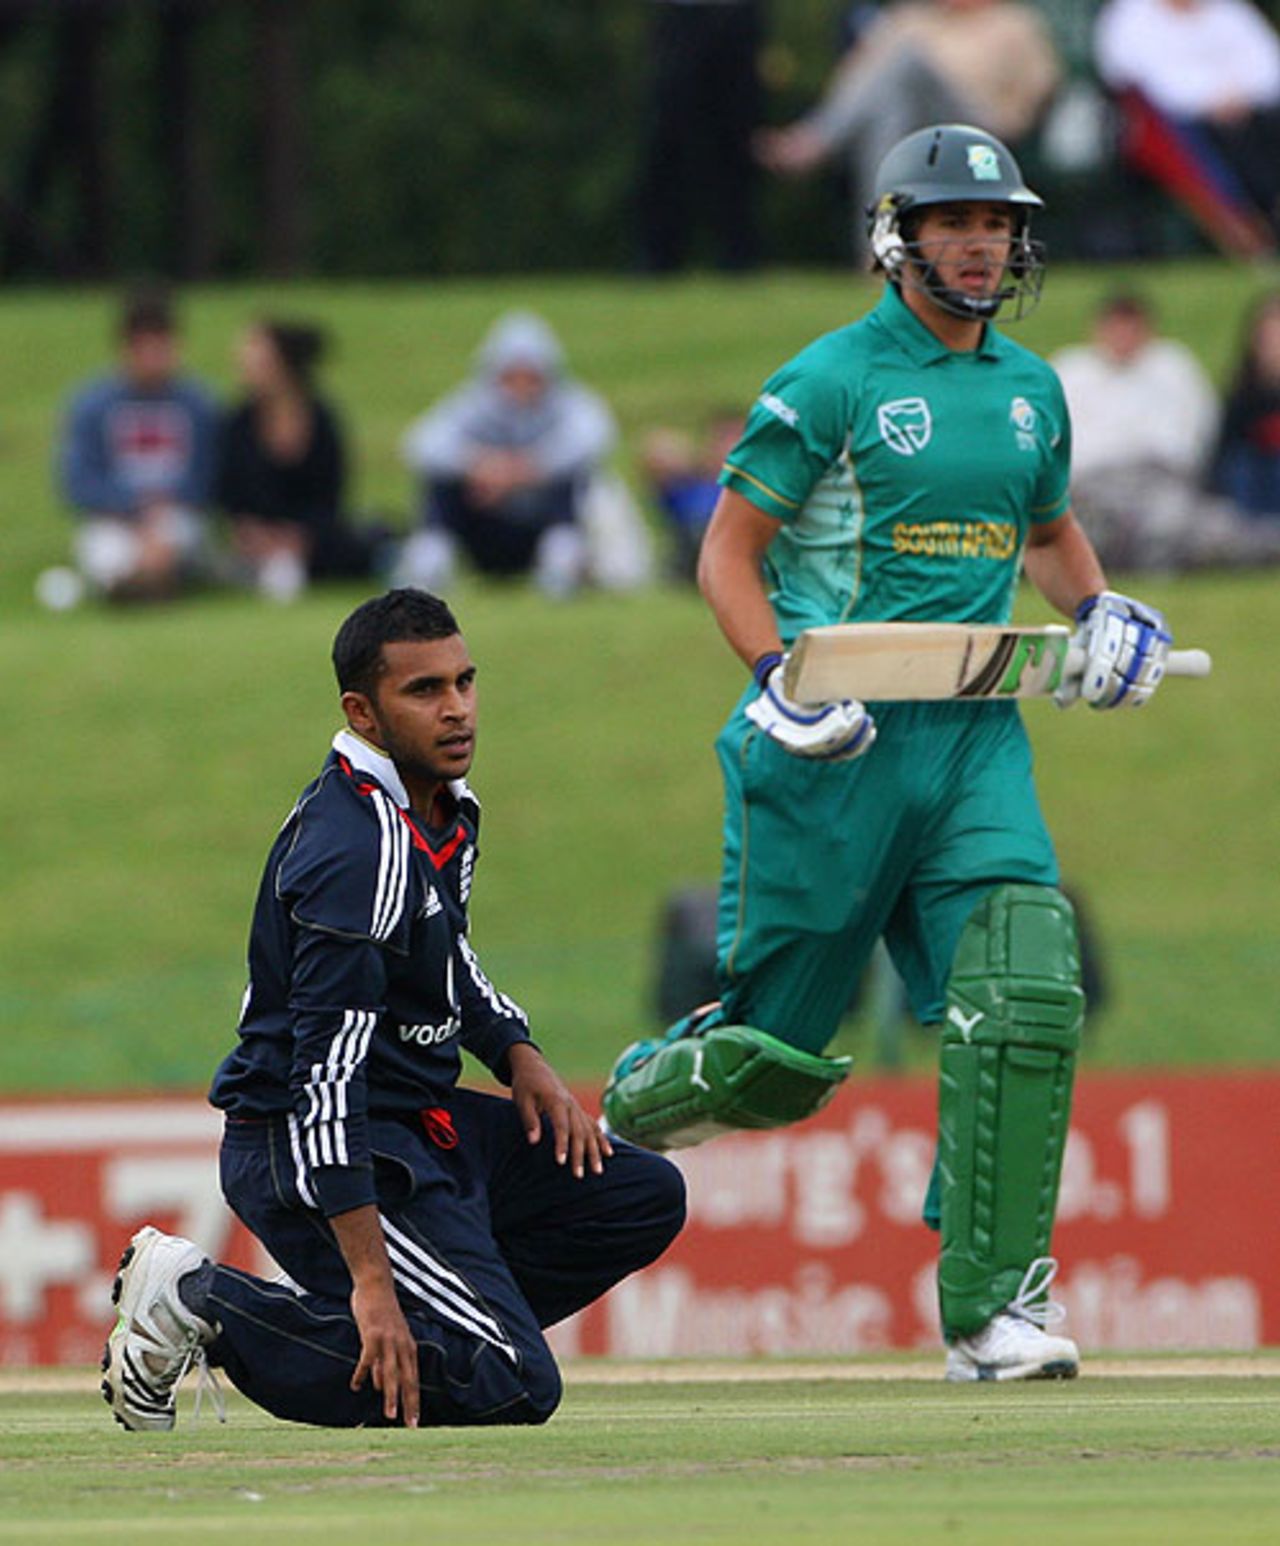 Adil Rashid enjoyed a better day than at Centurion on Sunday, but was still made to work hard, England XI, South Africa A v England XI, Potchefstroom, Nov 17, 2009